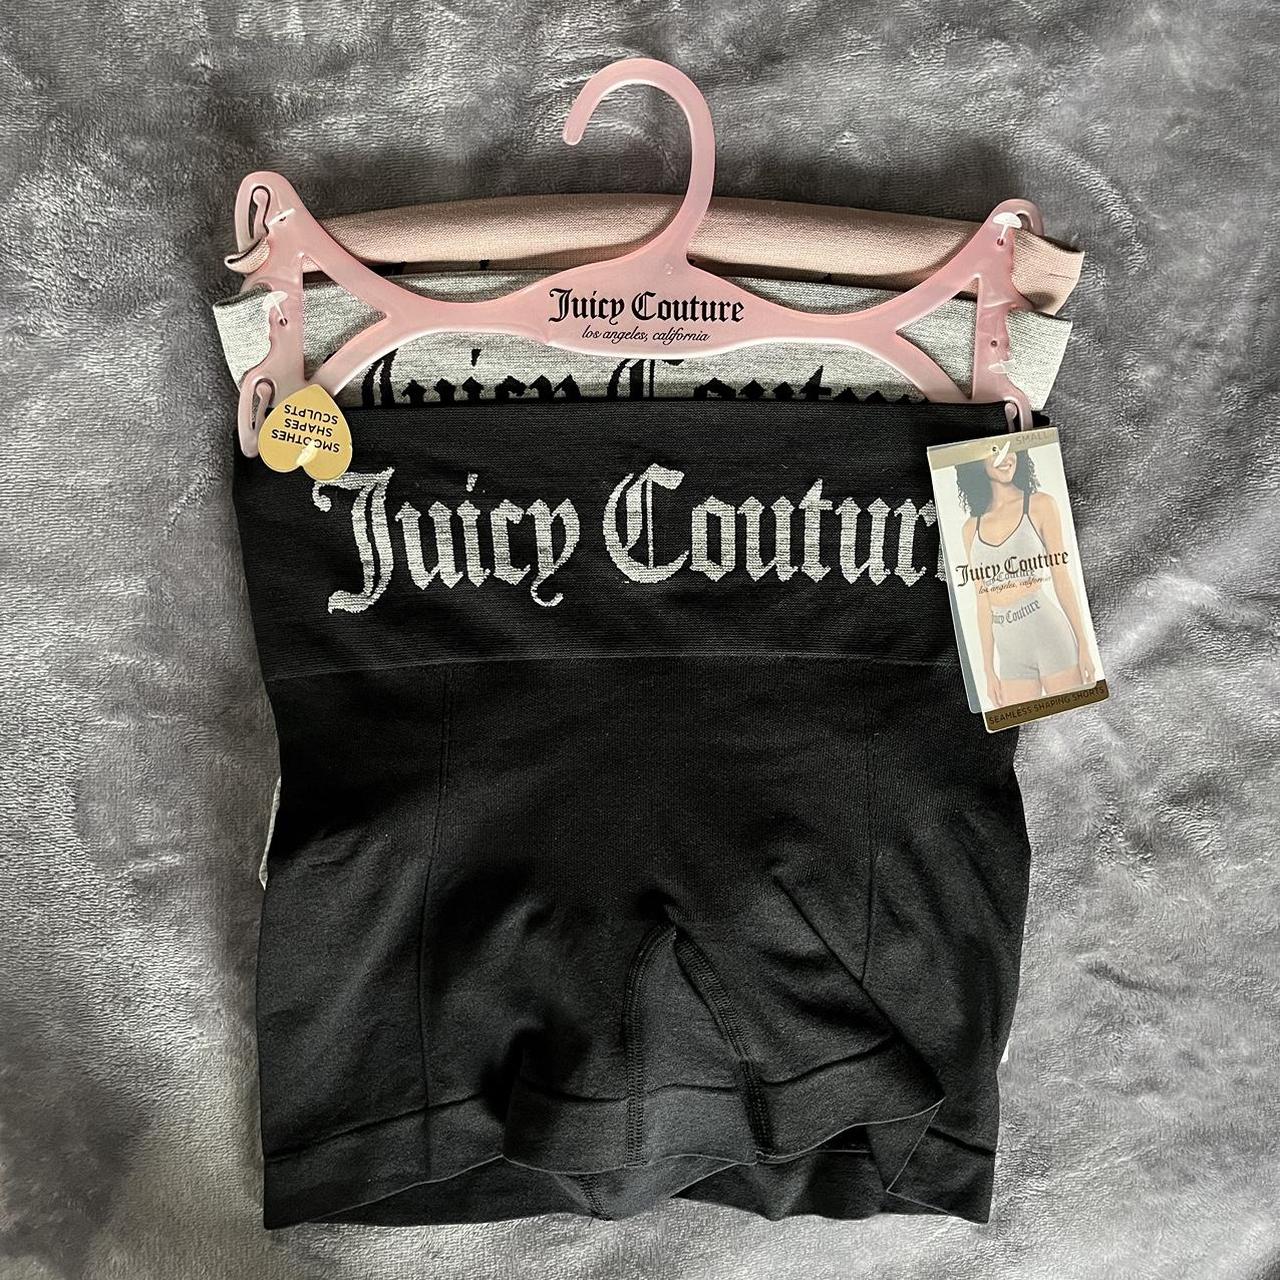 JUICY COUTURE Women's Seamless Shaping Bike Shorts 2 pack